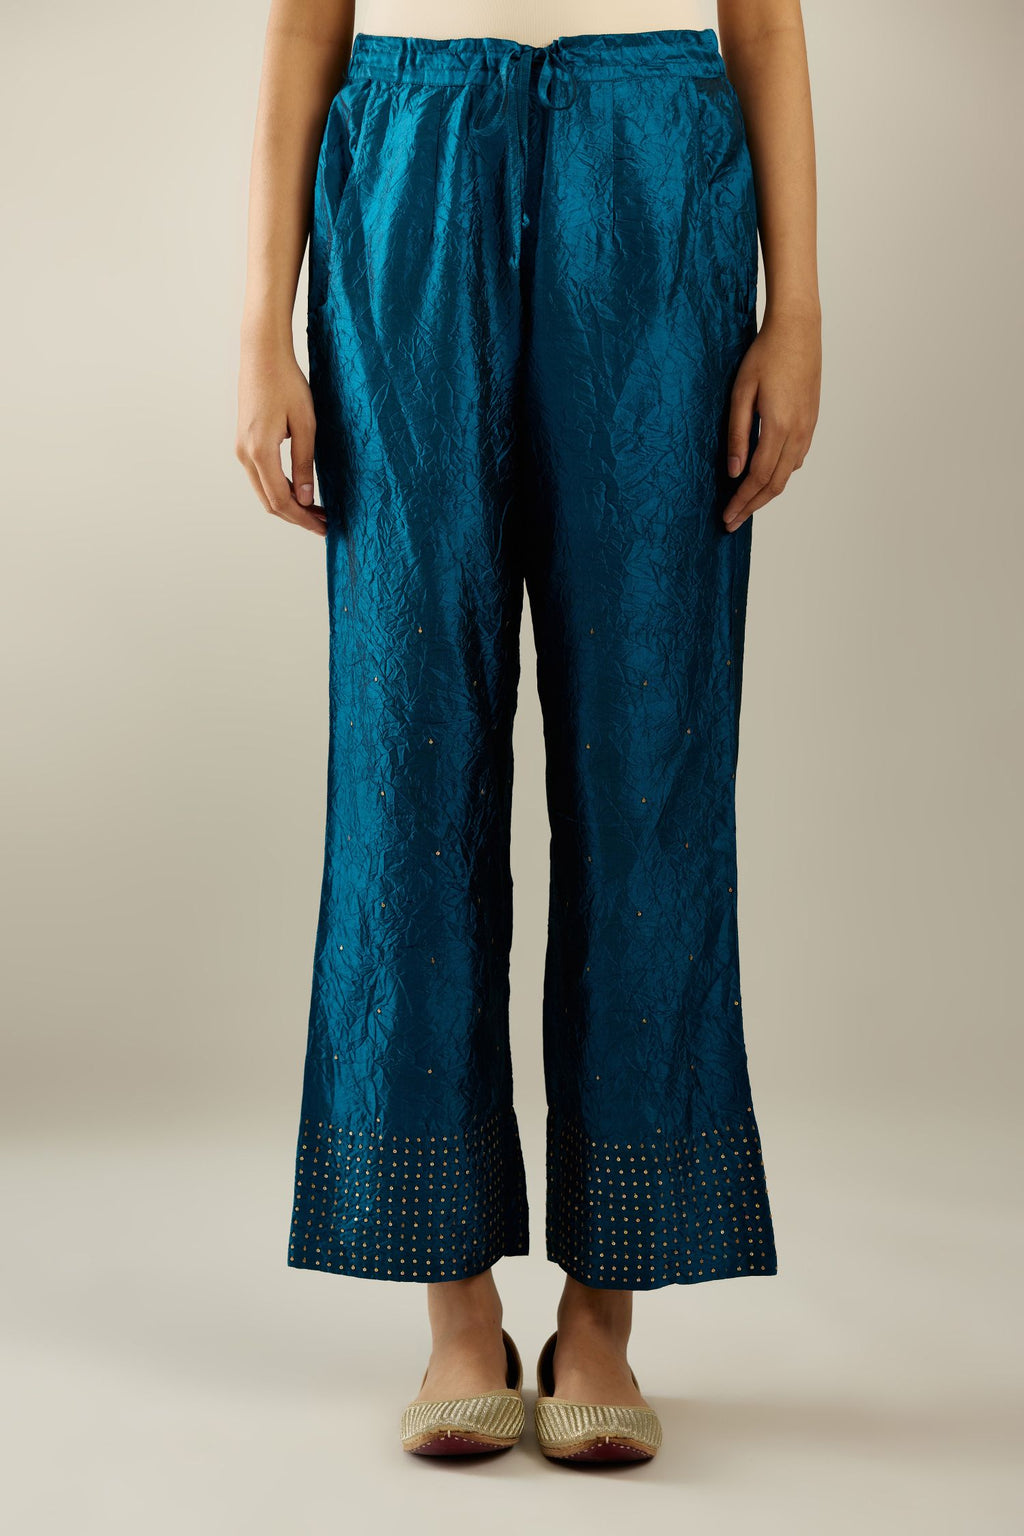 Dark teal hand crushed silk straight pants detailed with gold sequins at hem and a single sequin buti is sprayed all over the pants and side pockets